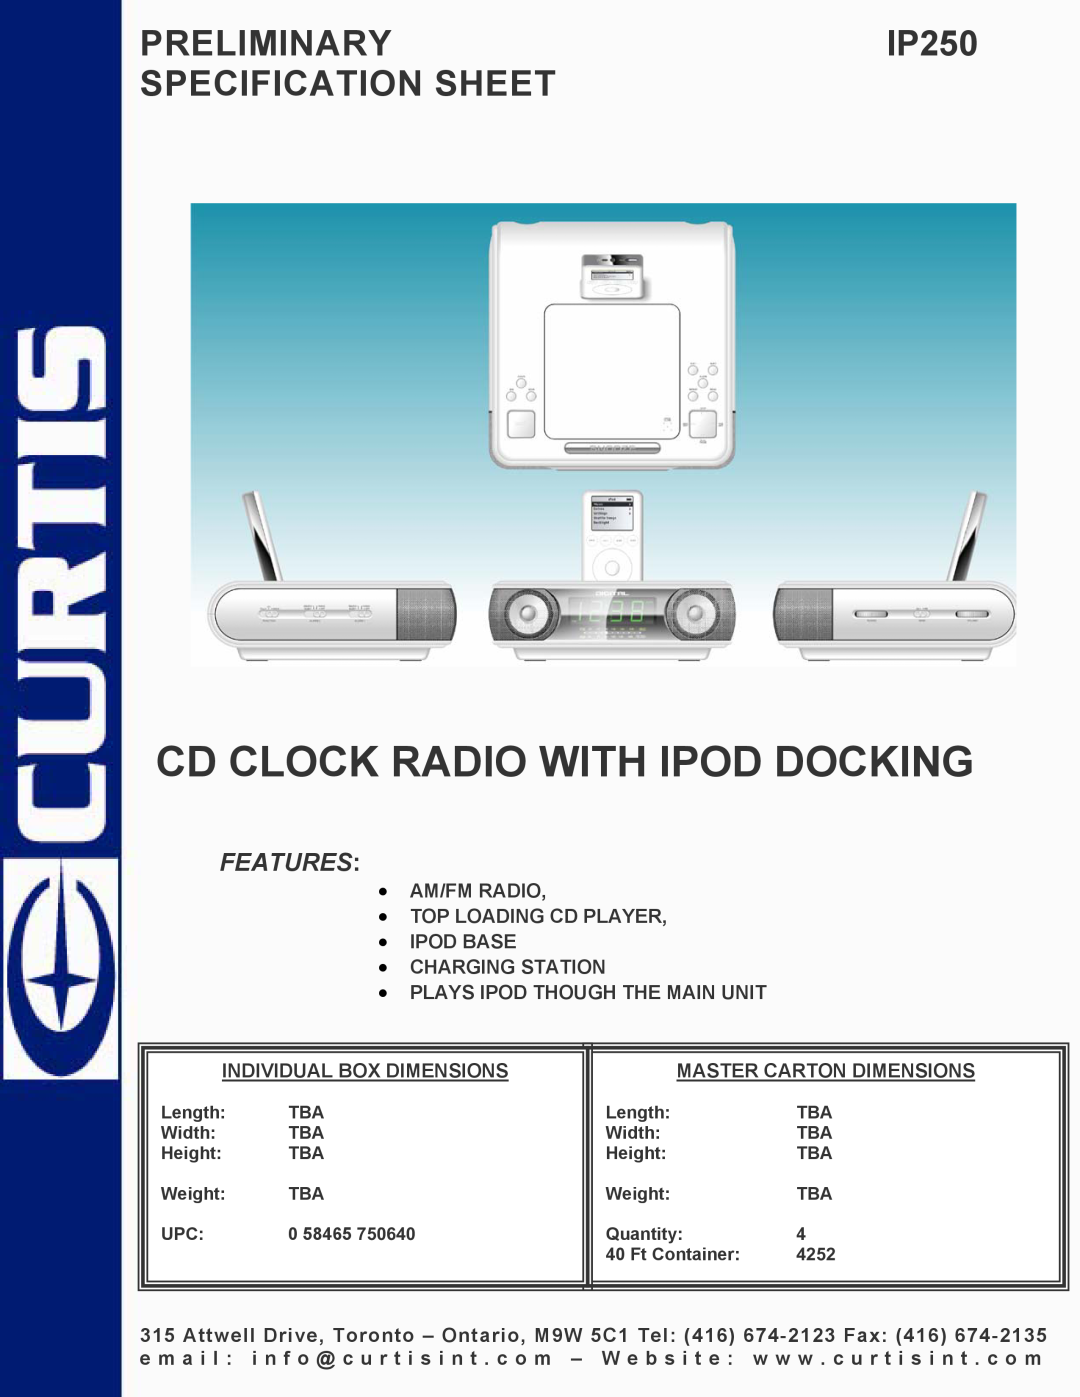 Curtis specifications Cd Clock Radio With Ipod Docking, PRELIMINARYIP250 SPECIFICATION SHEET, Features 